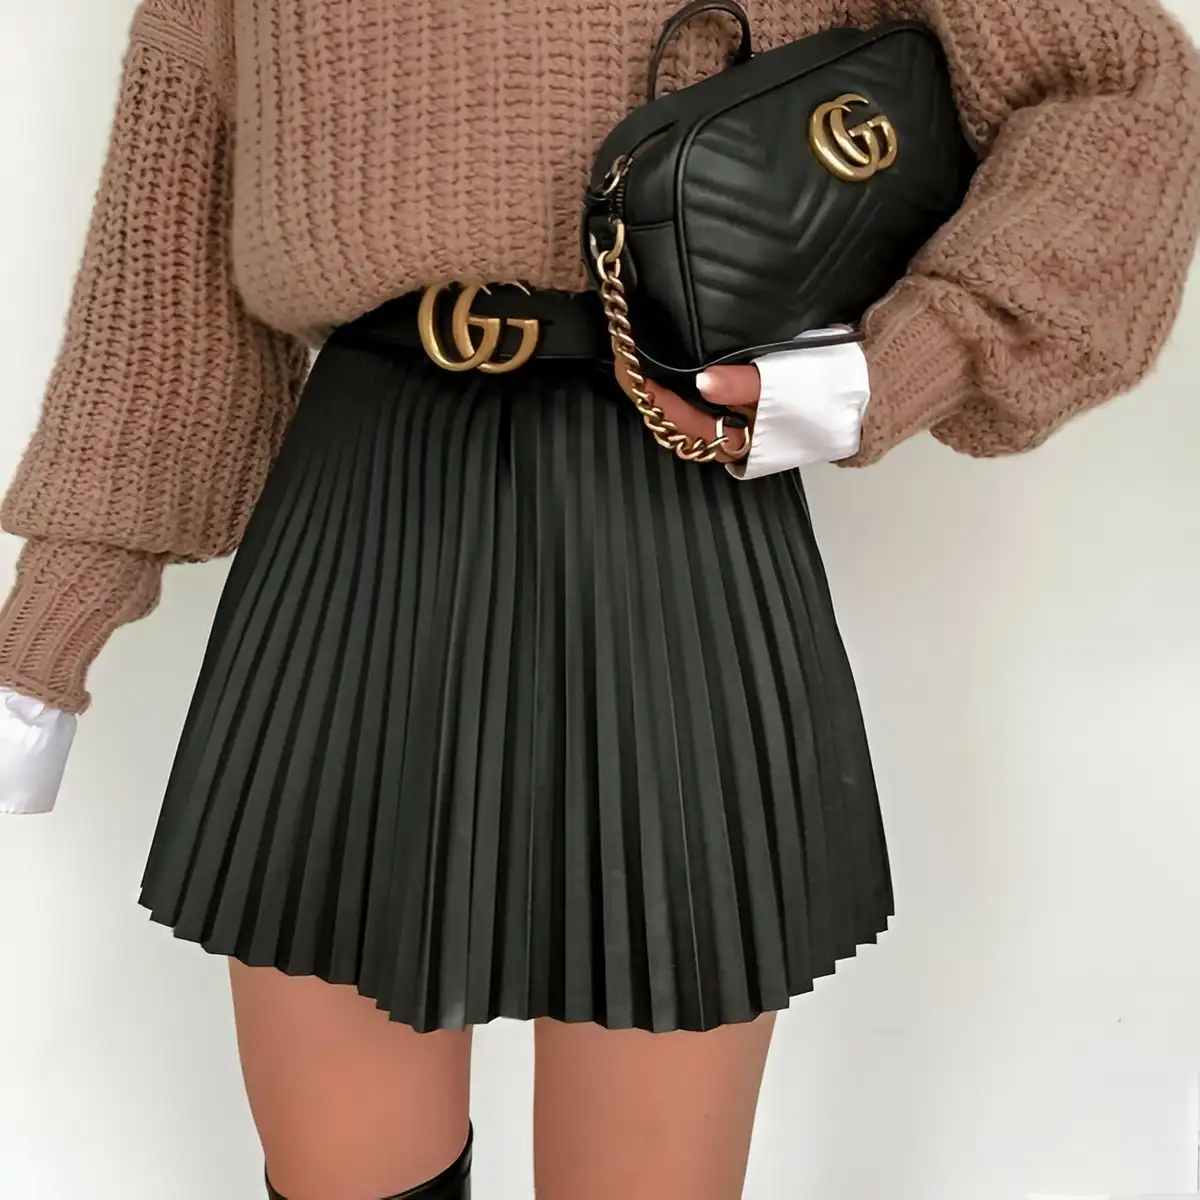 mini leather black pleated skirt paired with oversized chunky knit brown sweater and white shirt